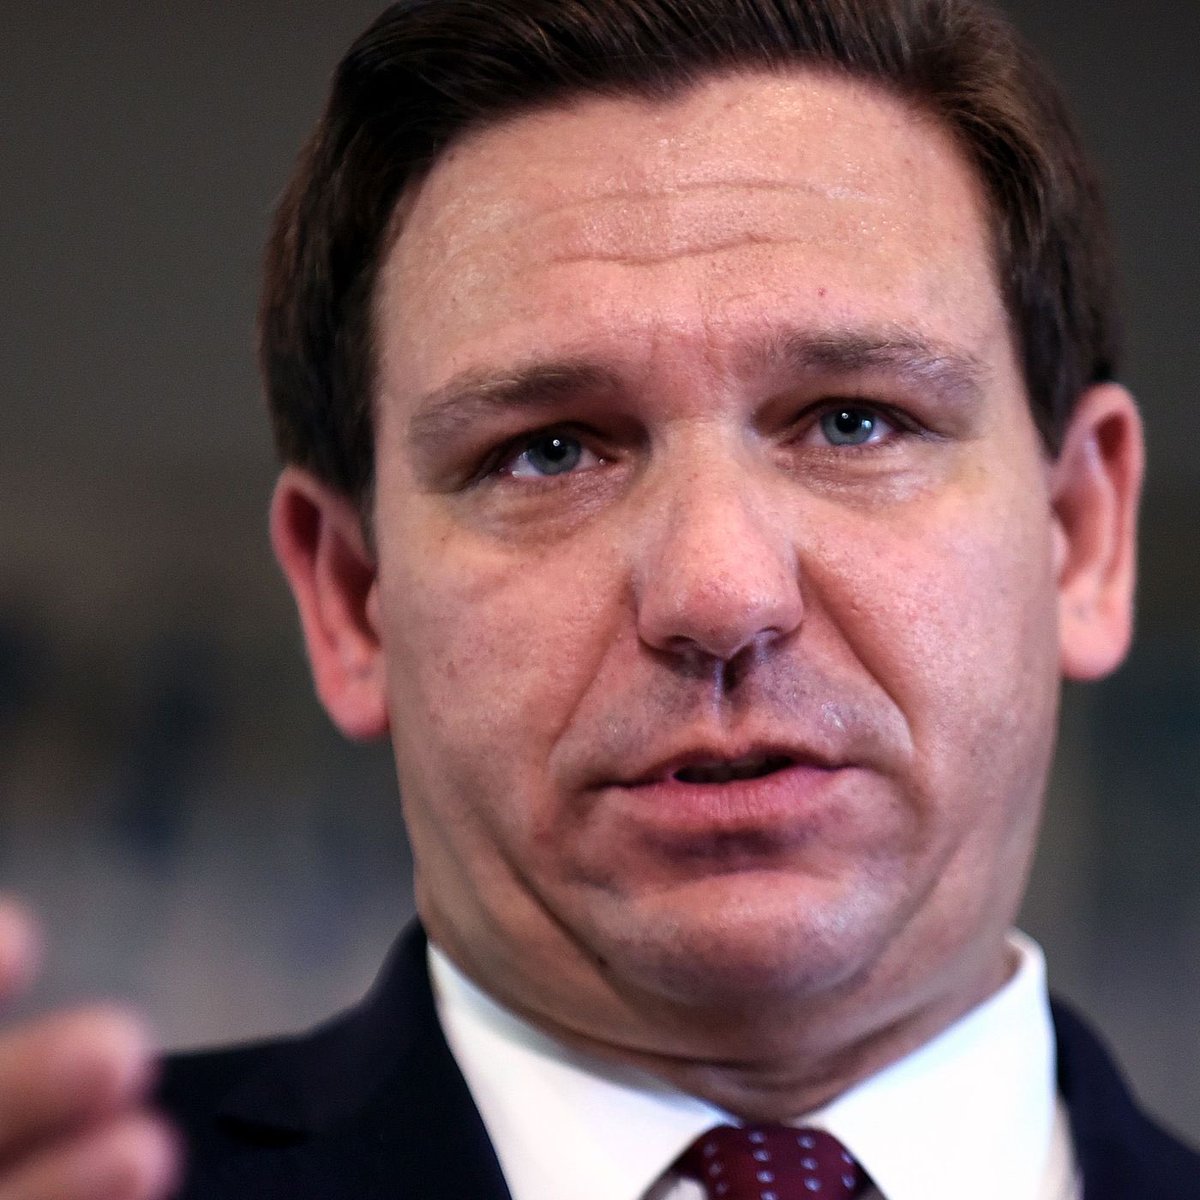 BREAKING: Ron DeSantis—who should be banned from the White House grounds—is announcing his bound to fail run for president tomorrow. DeSantis passed some of the most hateful, asinine and ignorant laws in the country, and he’s losing his battle with Mickey Mouse. DeSantis should…